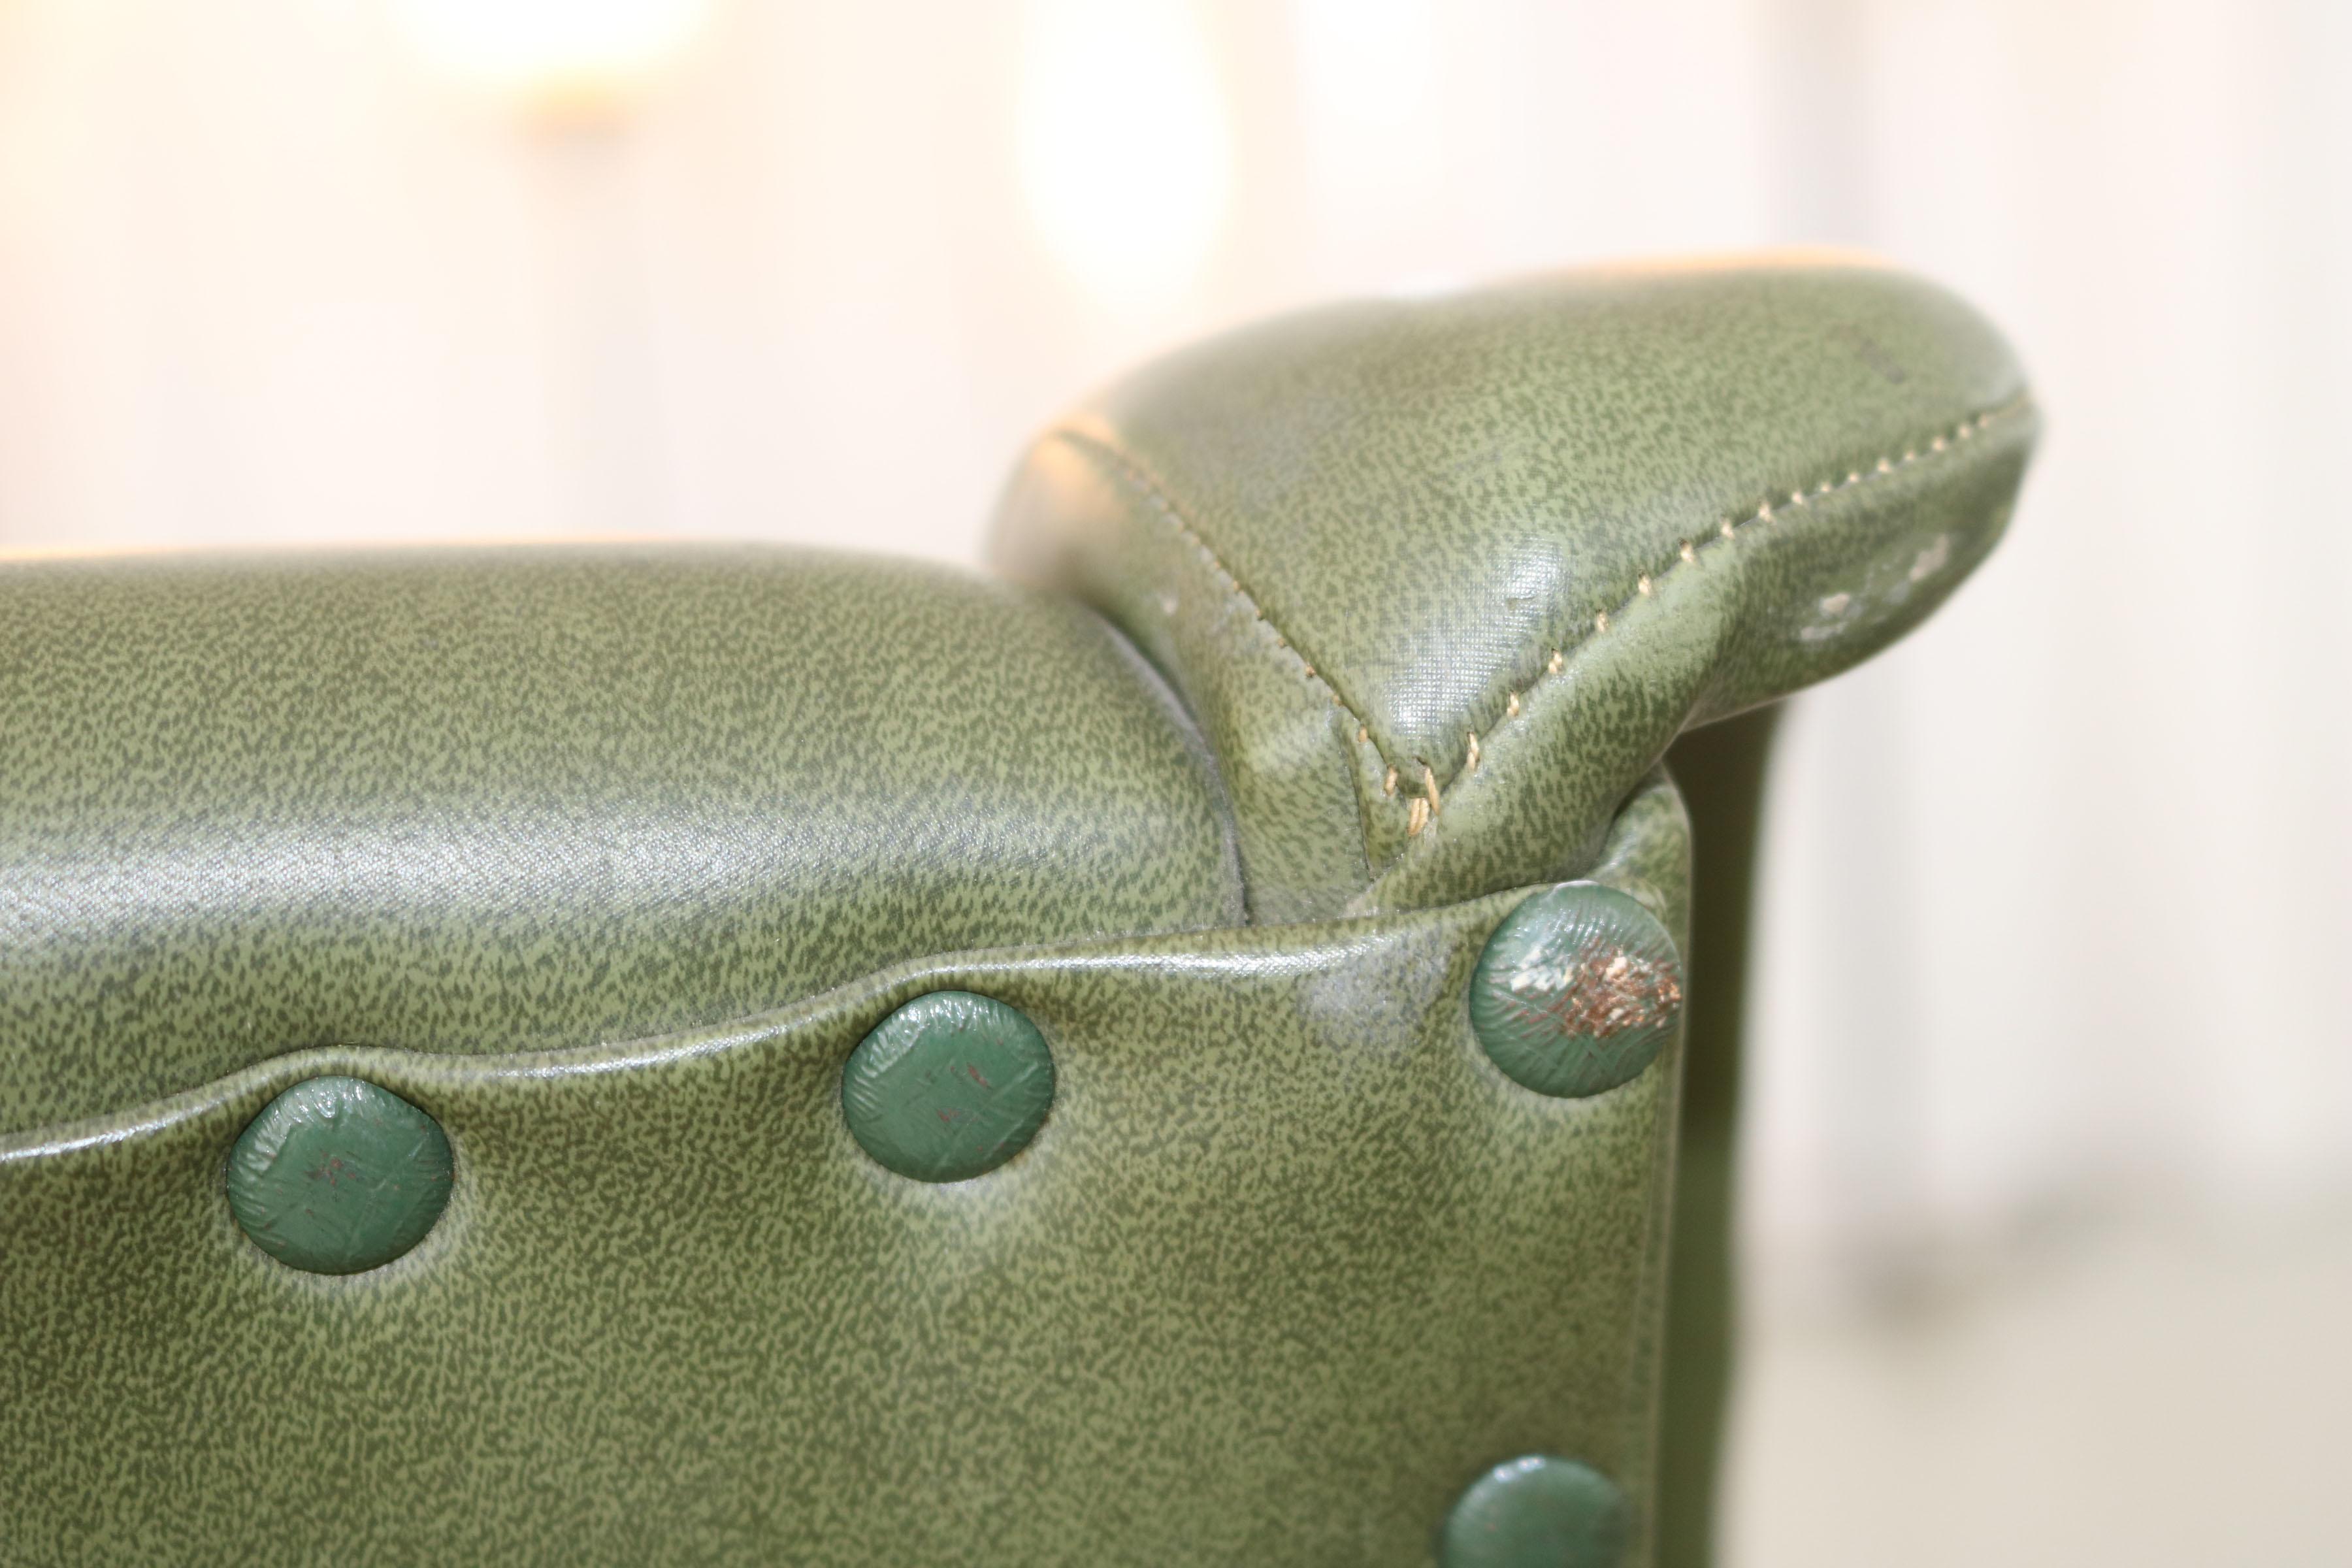 Pair of Italian Midcentury Armchairs in Original Green Fauxleather, 1950s For Sale 3